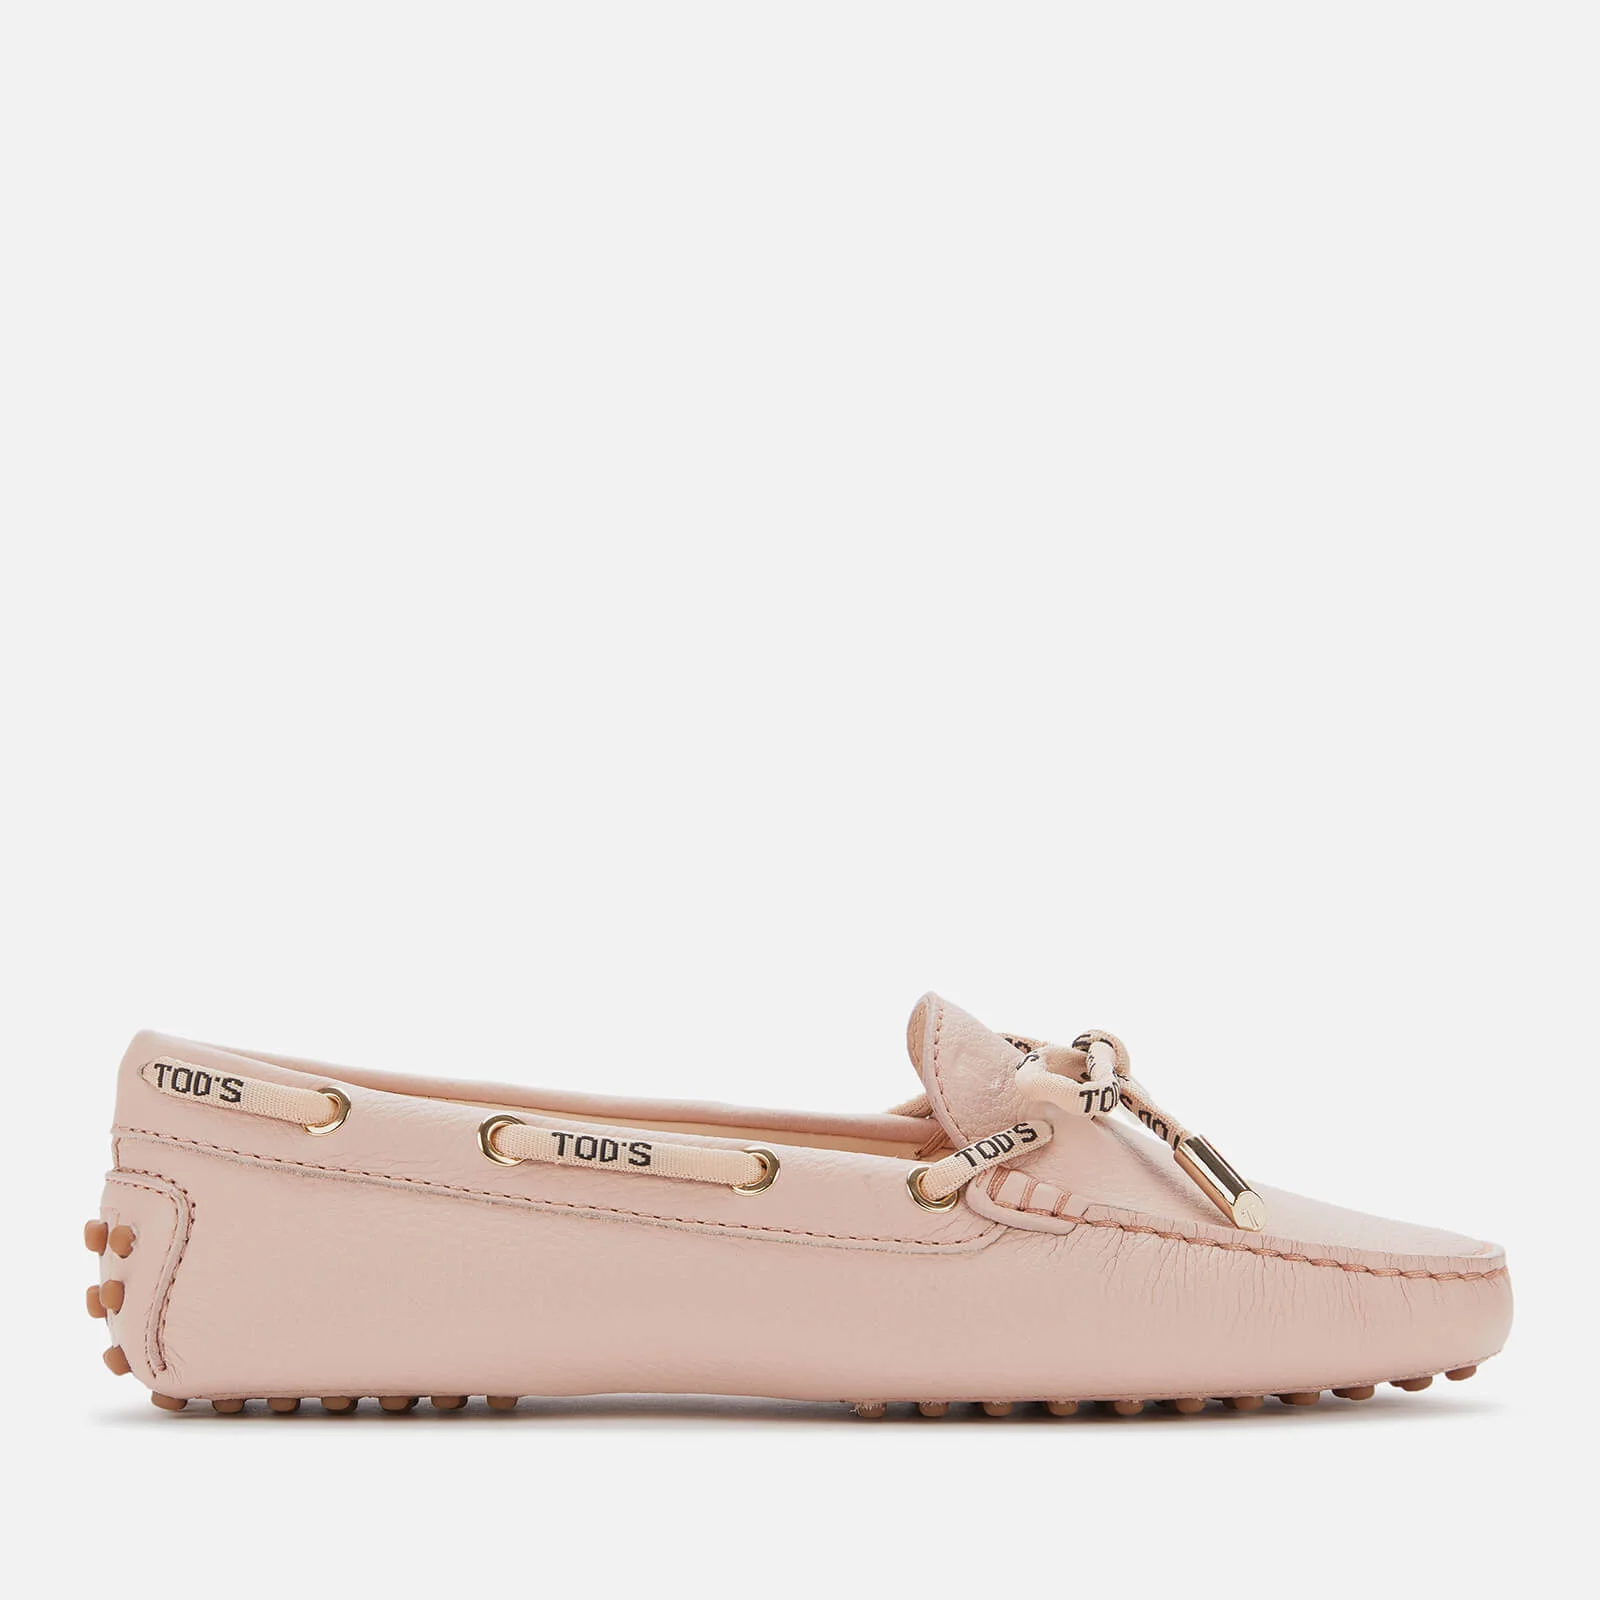 Tod's Women's Heaven Driving Shoes - Pink Image 1